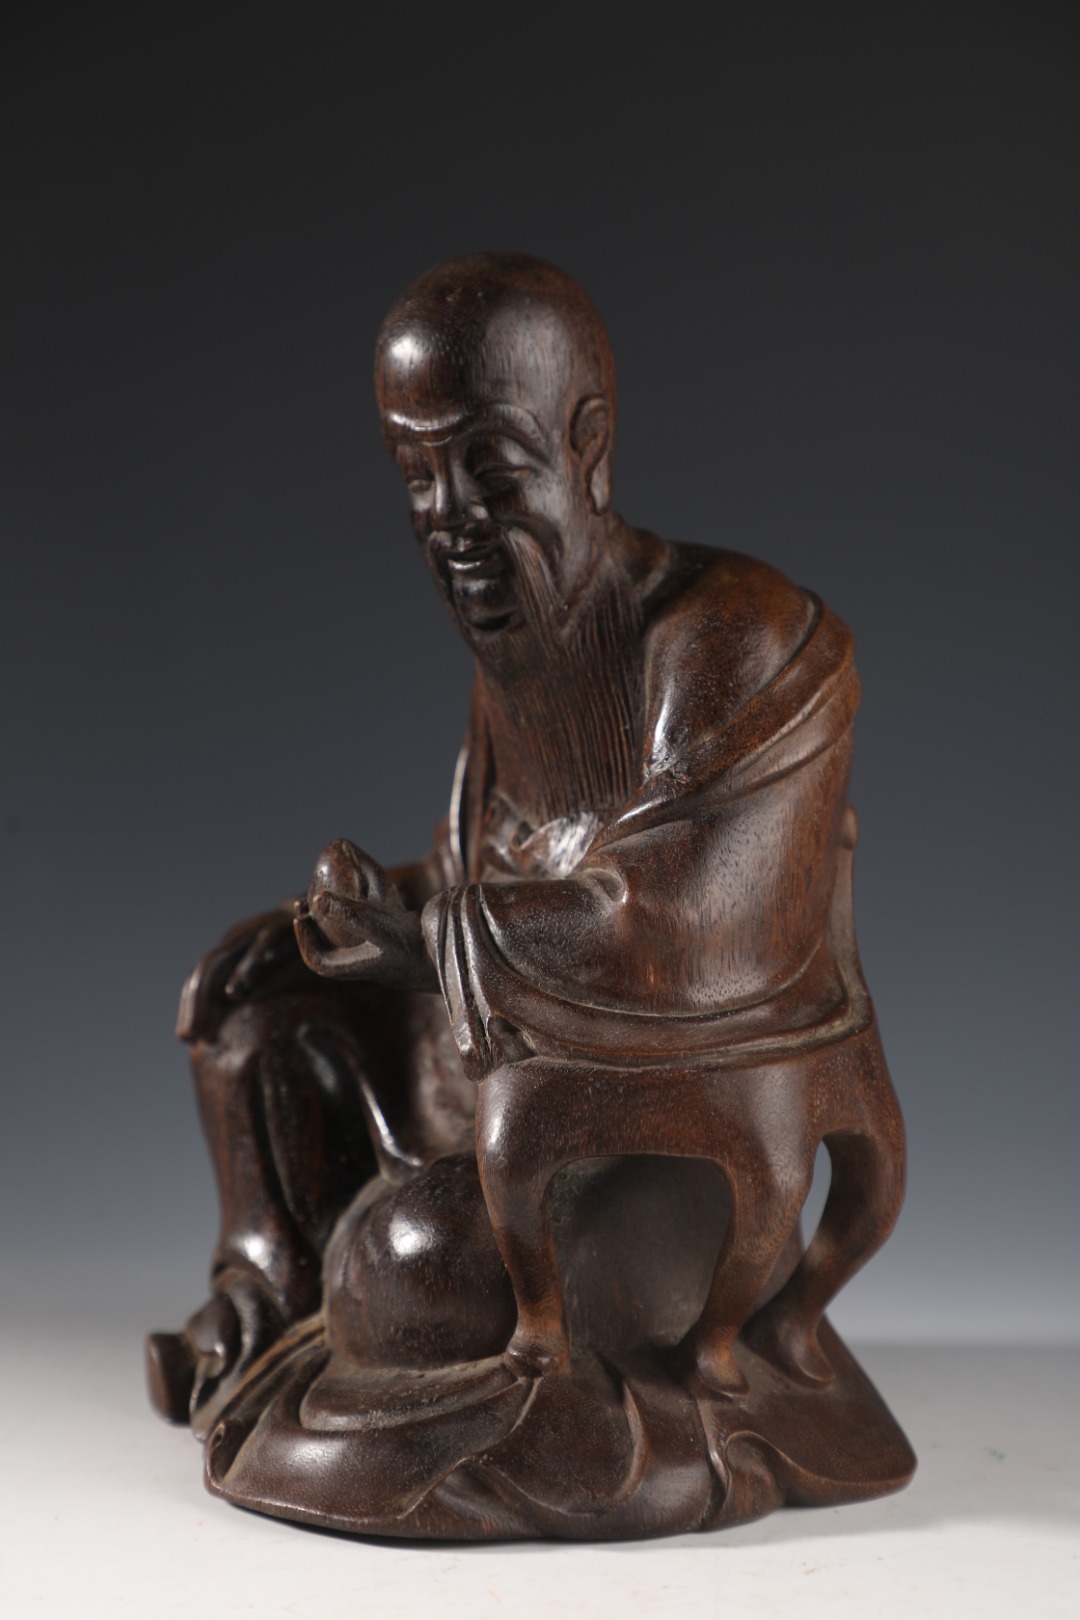 Qing Dynasty: Precious sunk old agarwood medicine fairy seated statue - Image 5 of 9